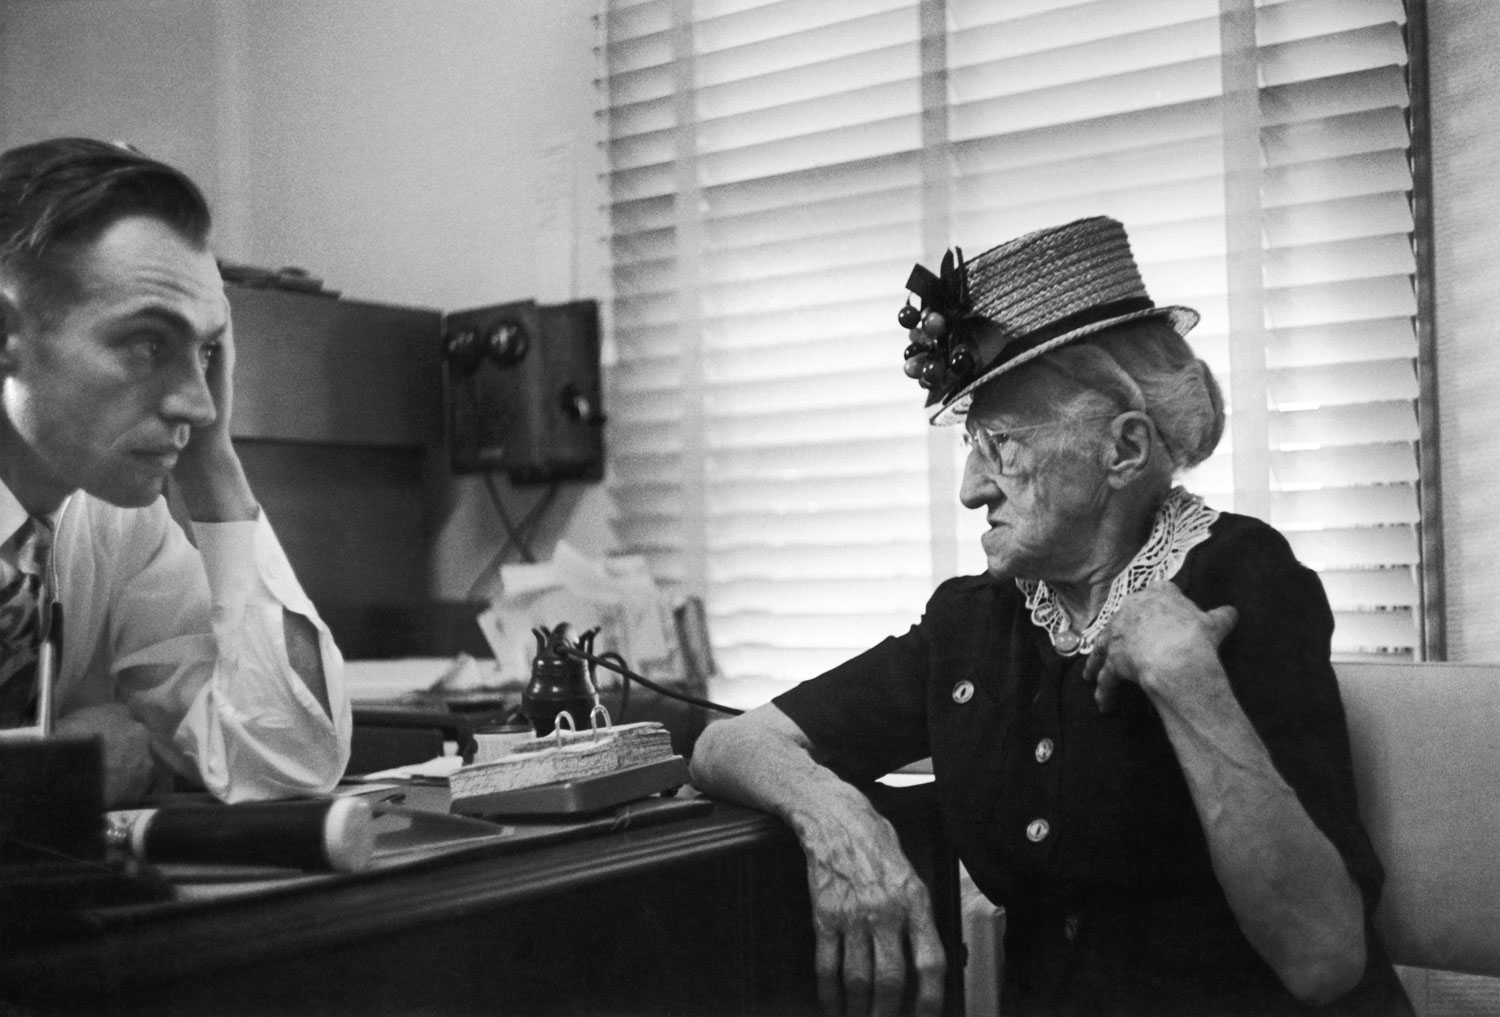 Not published in LIFE. Dr. Ceriani with a patient.